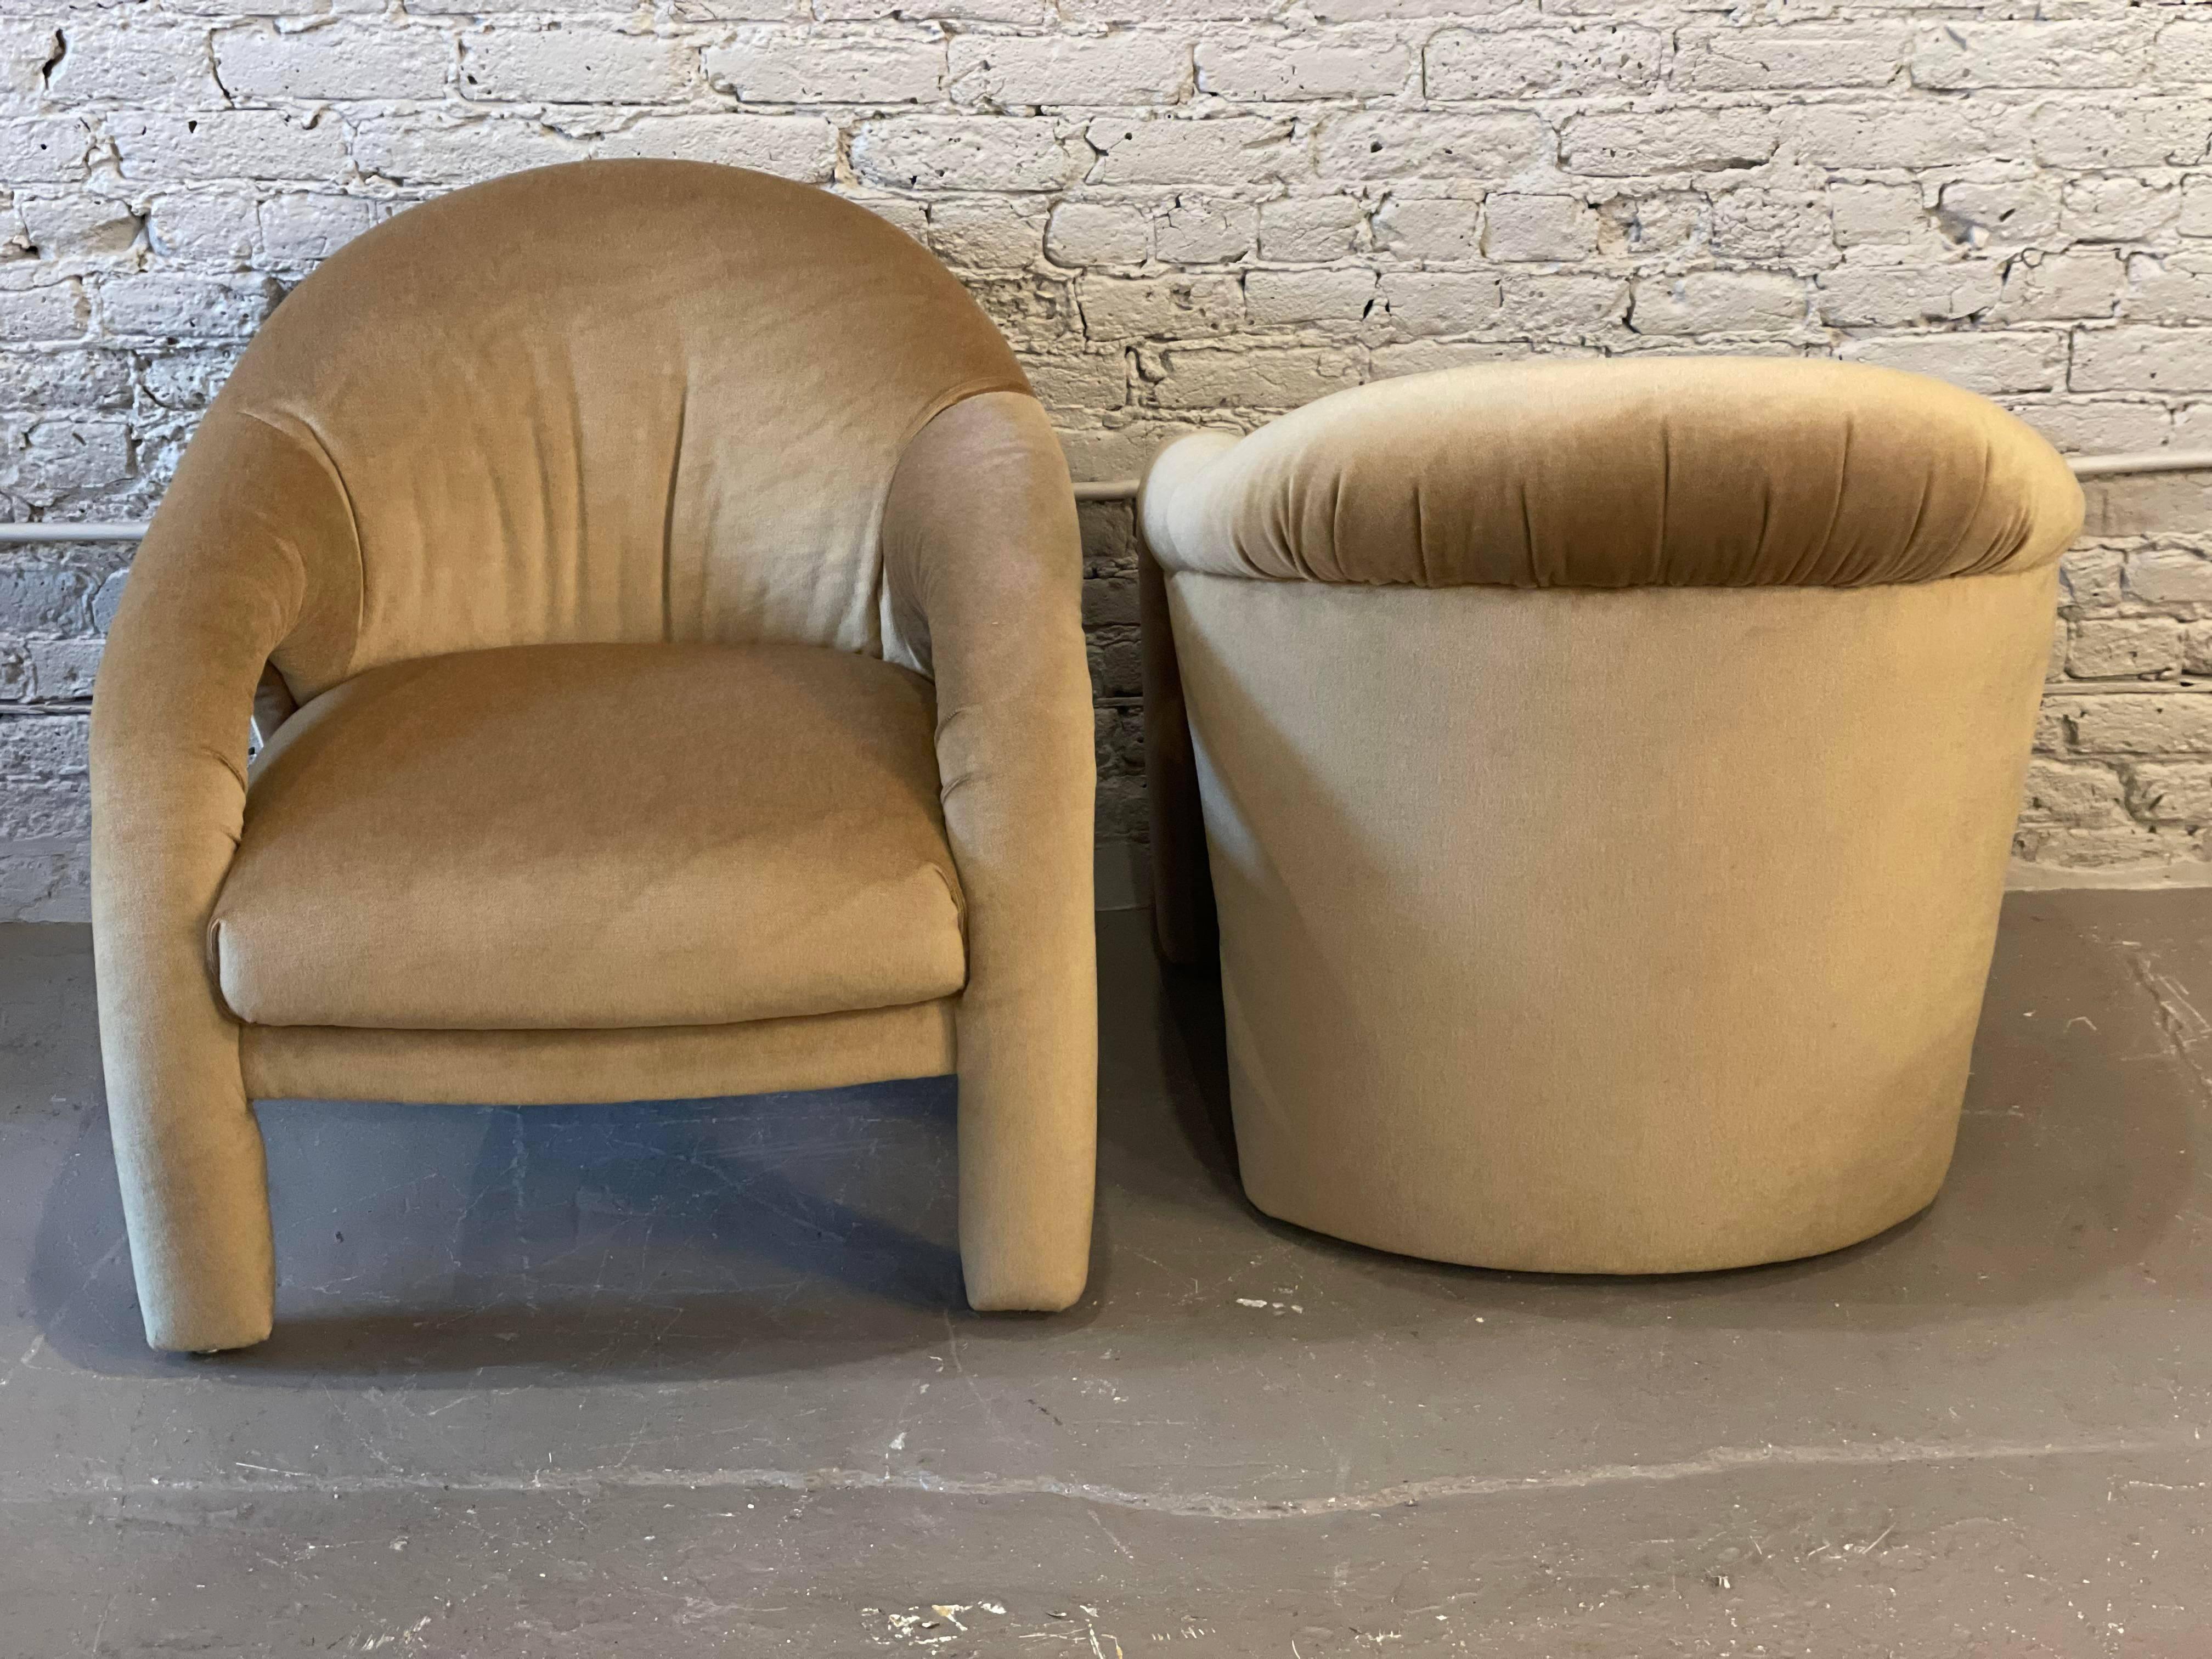 American 1980s Postmodern Arc Sculptural Chairs in Camel Mohair, a Pair For Sale